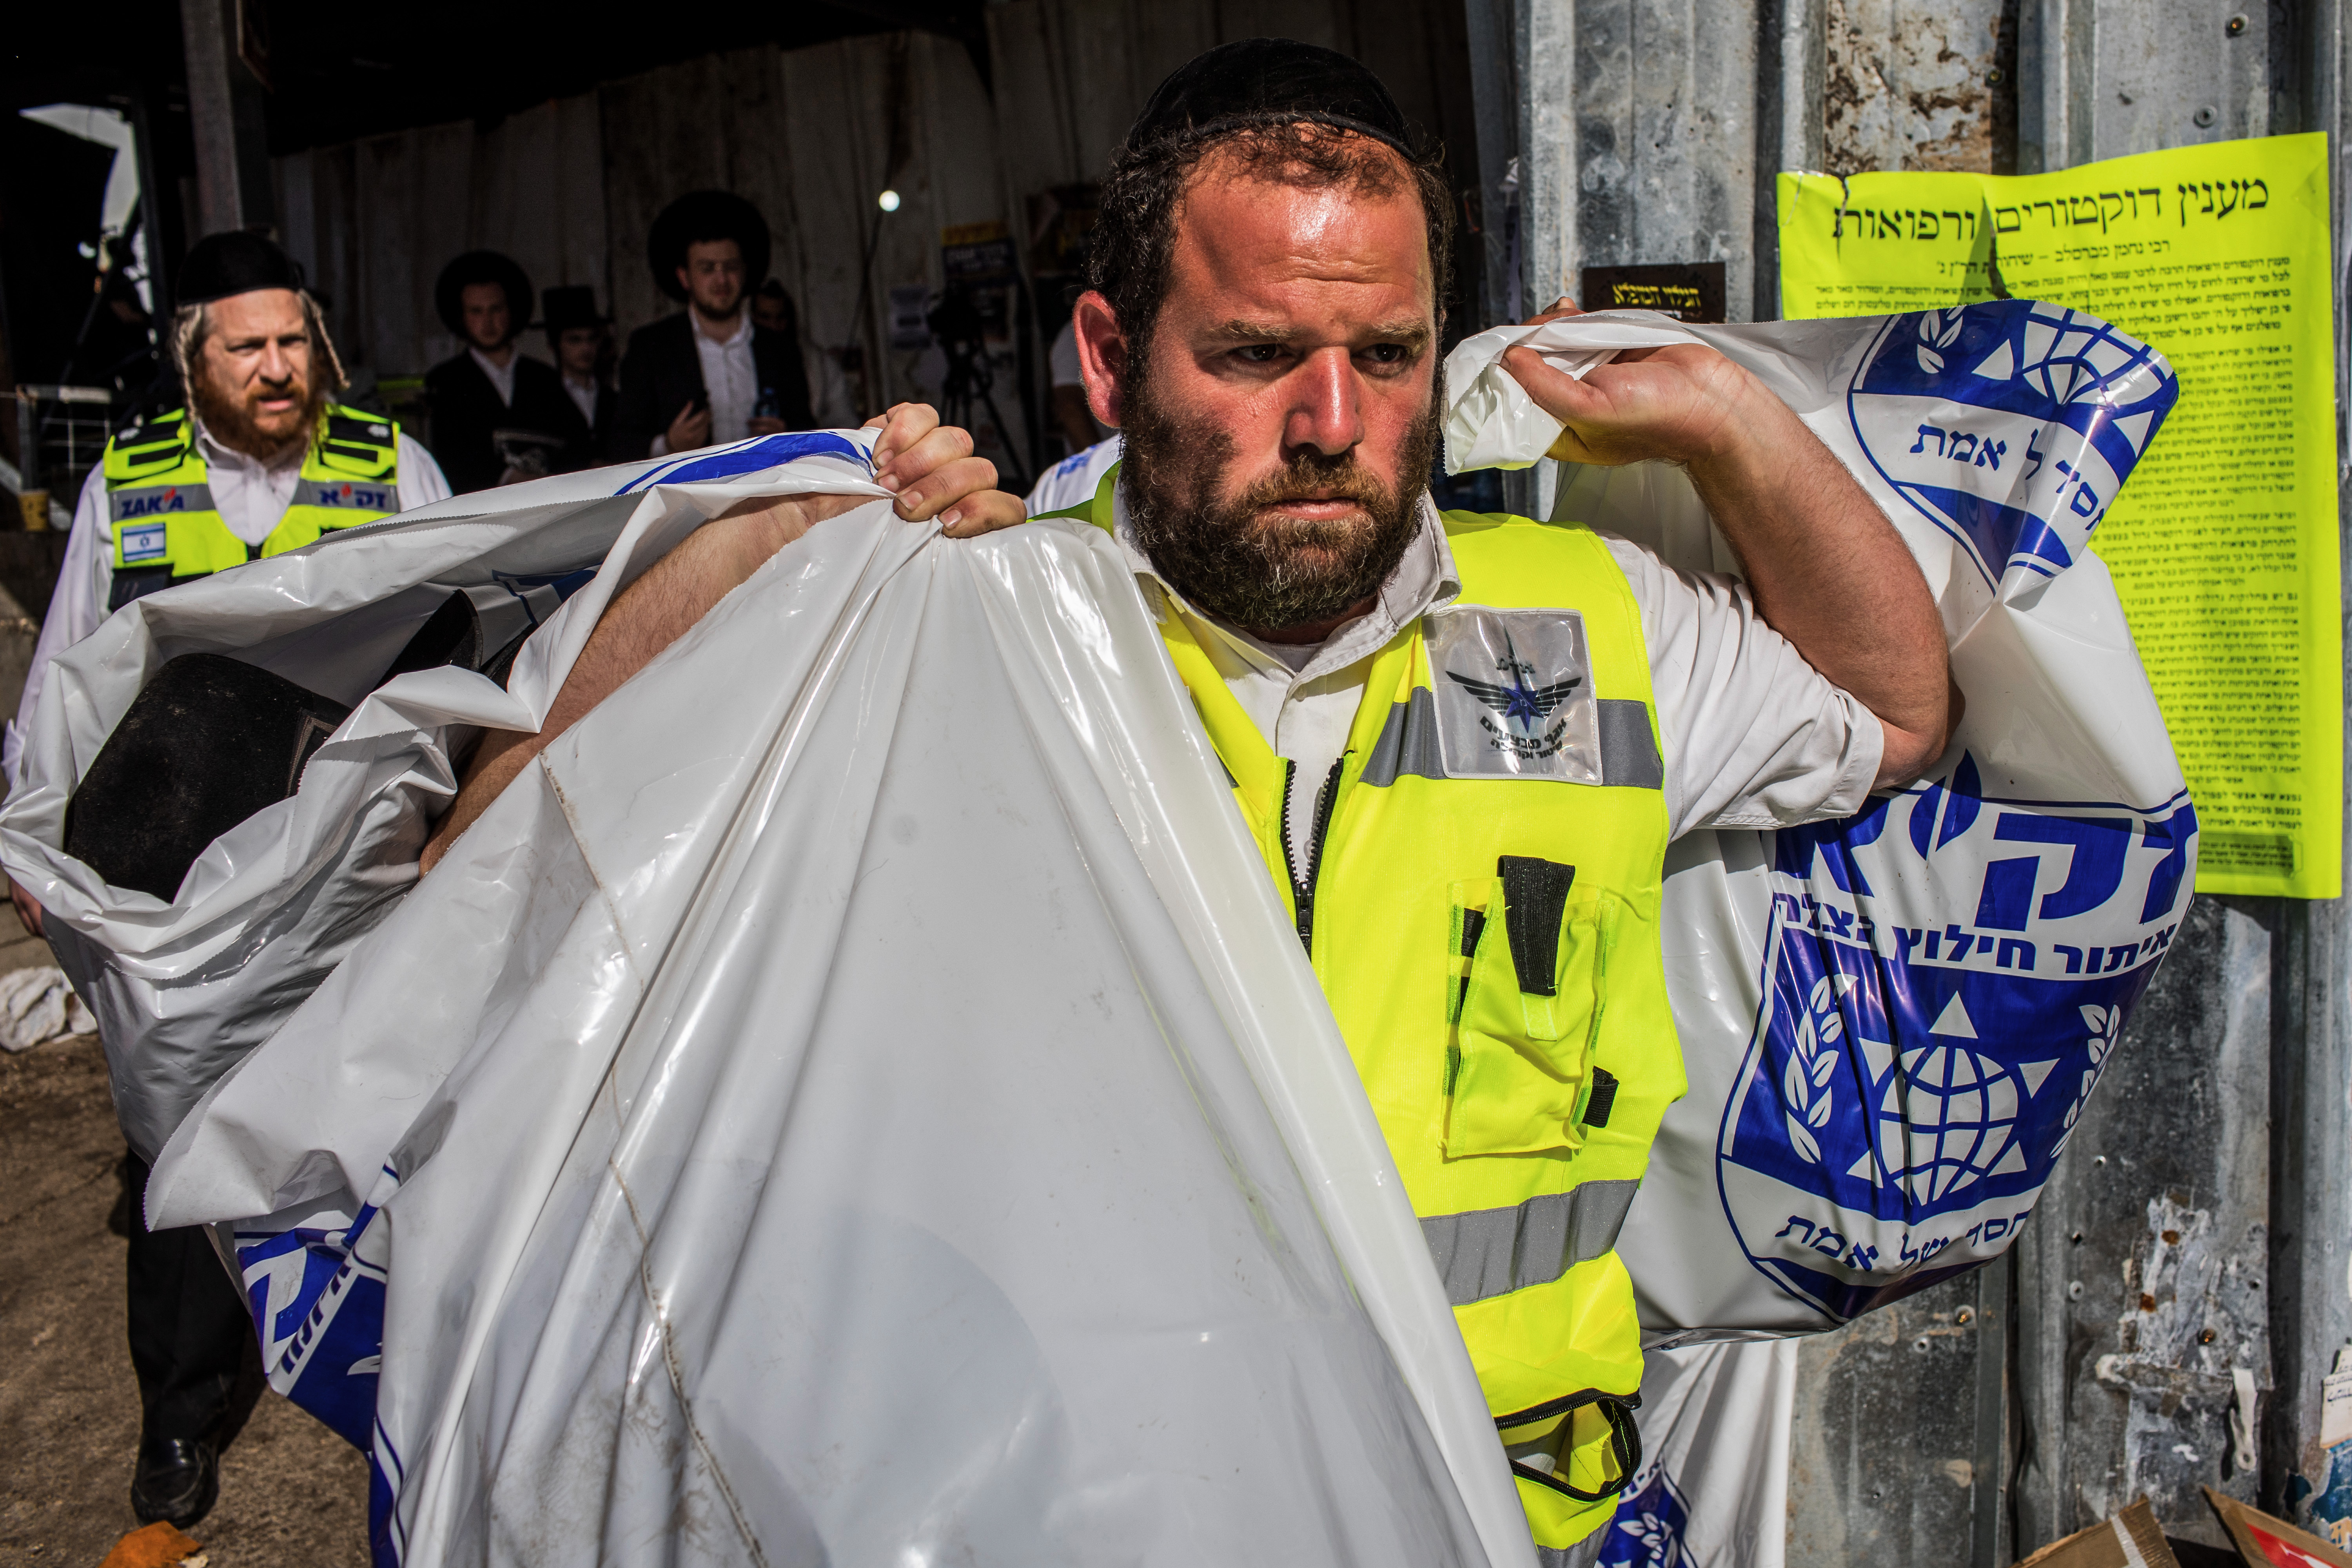 Israeli rescue workers and security officials hold bags filled with personal items at the Jewish Orthodox pilgrimage site of Mount Meron, where dozens of worshippers were killed in a stampede during the Jewish religious festival of Lag Ba'Omer in northern Israel.